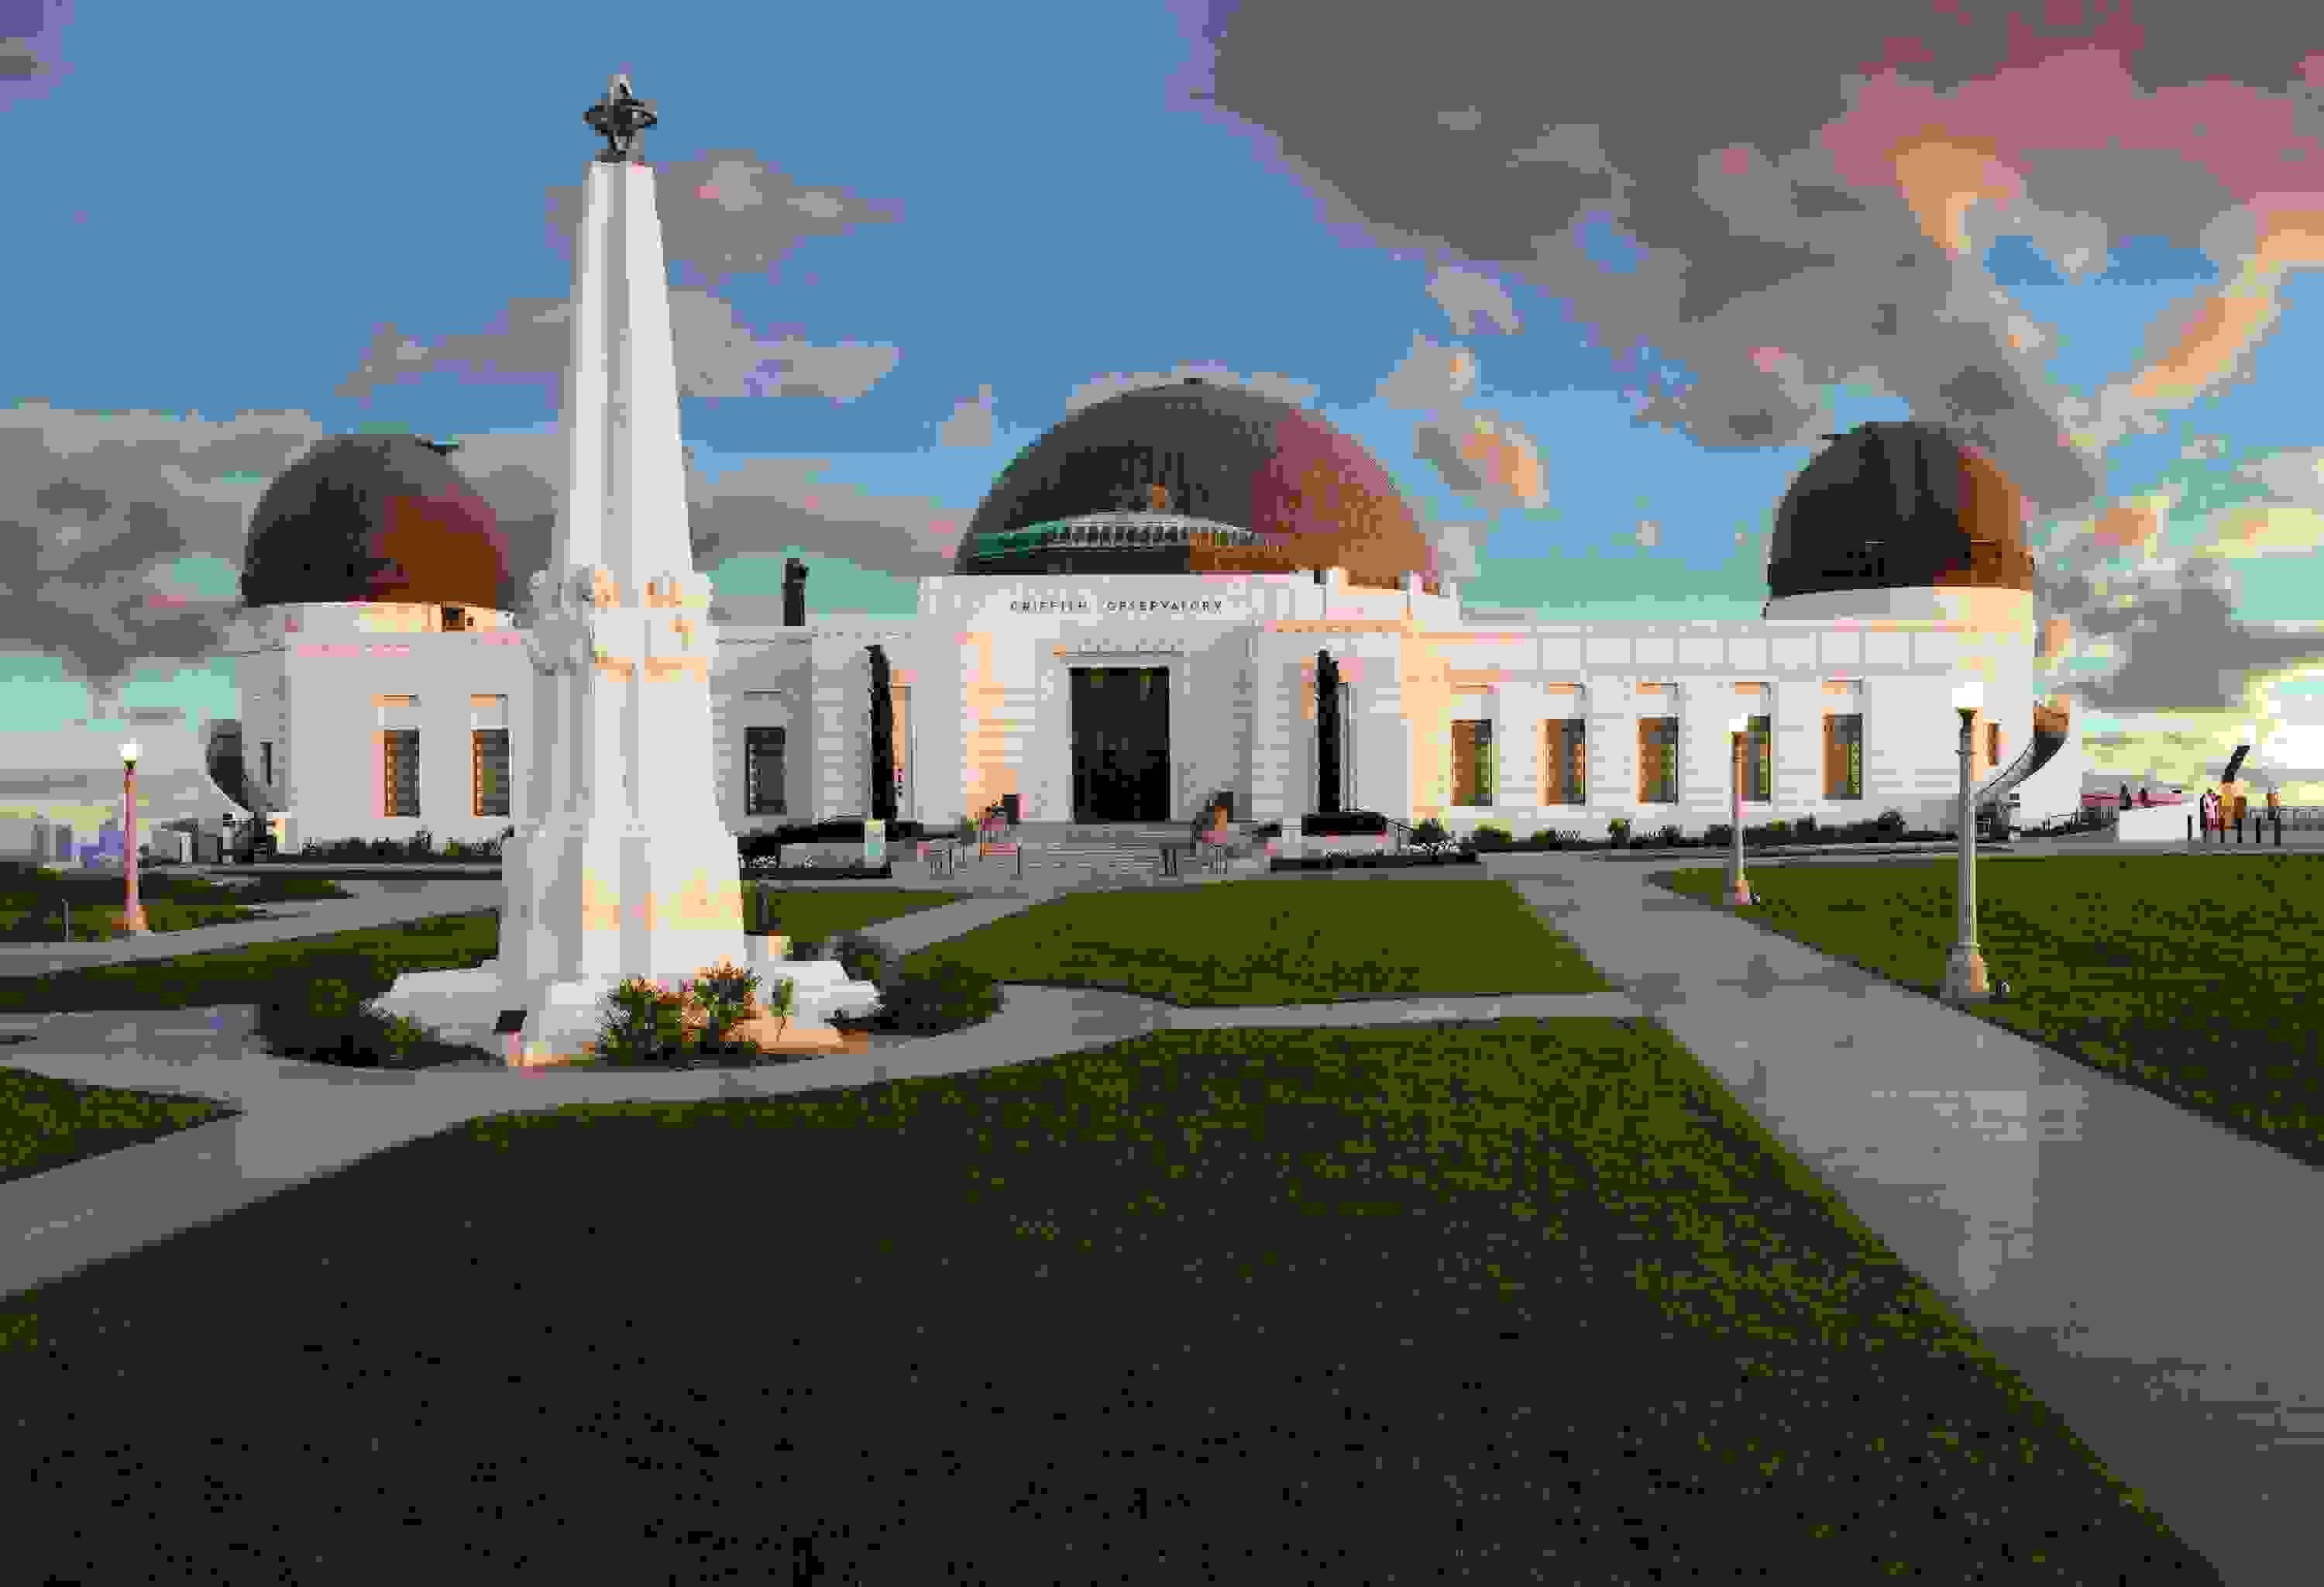 A photograph of the Griffith Observatory in Los Angeles.